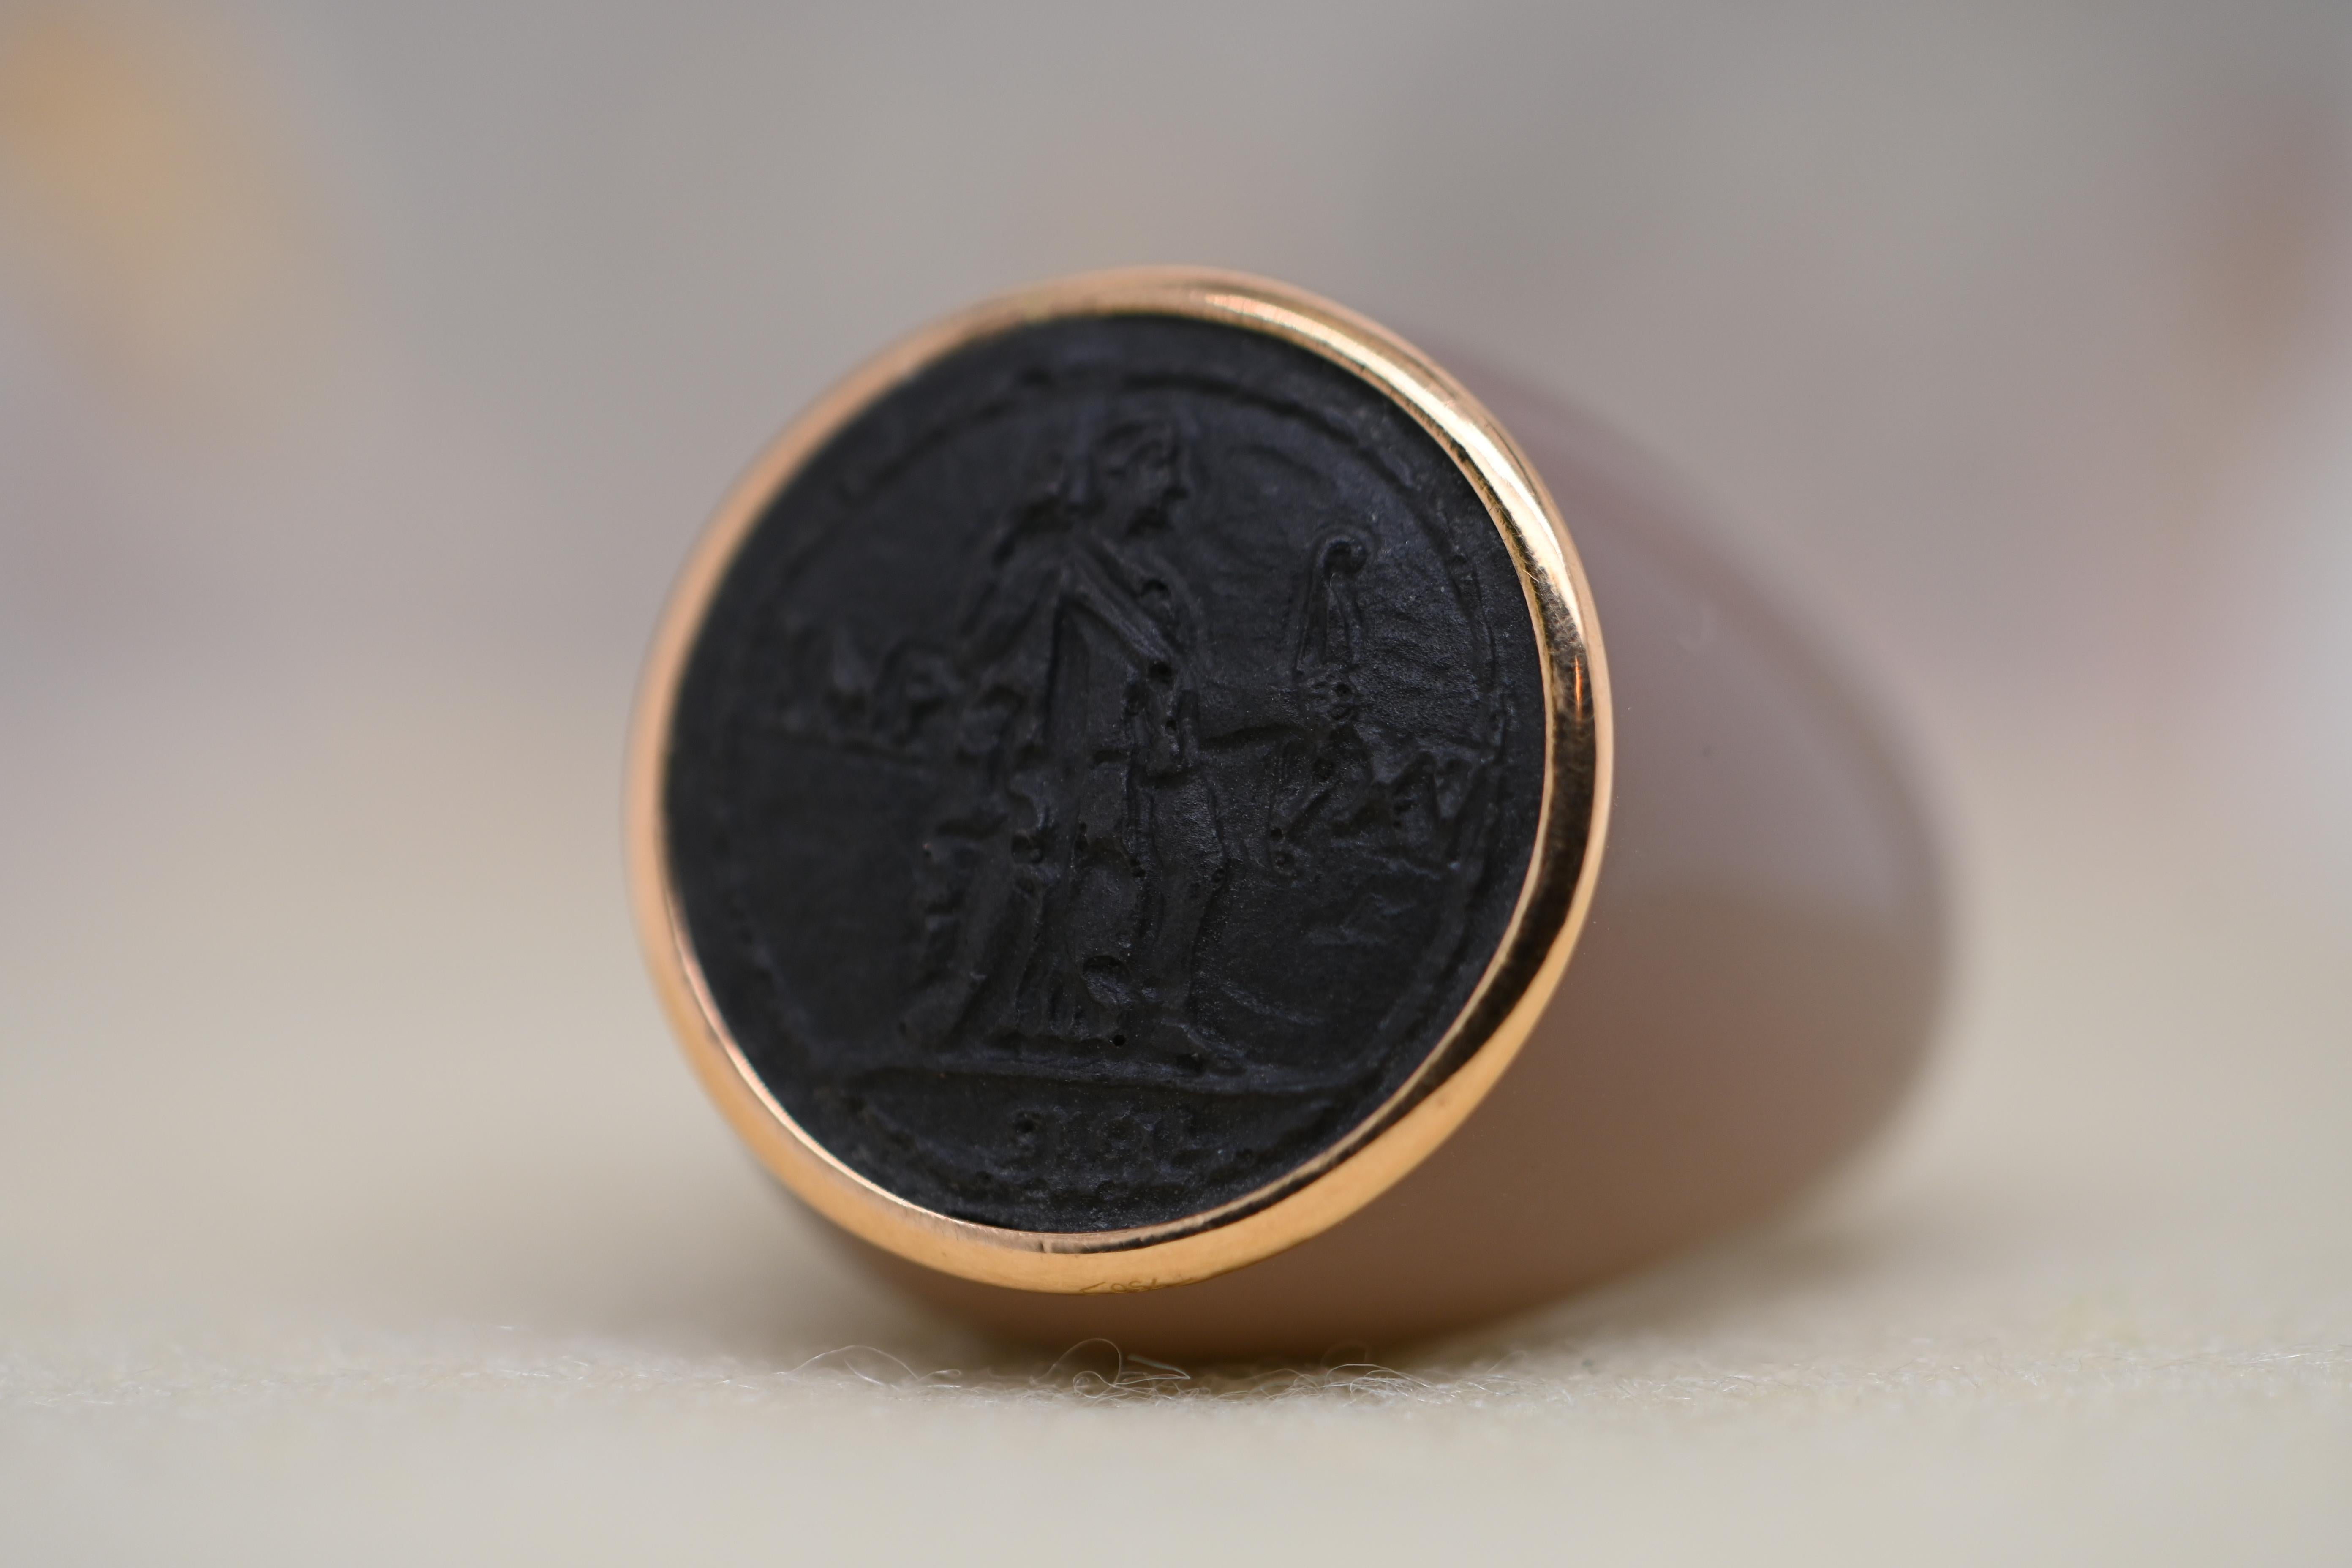 This remarkable ring features a light brown color that evokes both warmth and elegance, while adding a touch of mystery to its allure. Its bakelite cameo forms the central element of this work of art, and is delicately framed by 18K gold, a precious